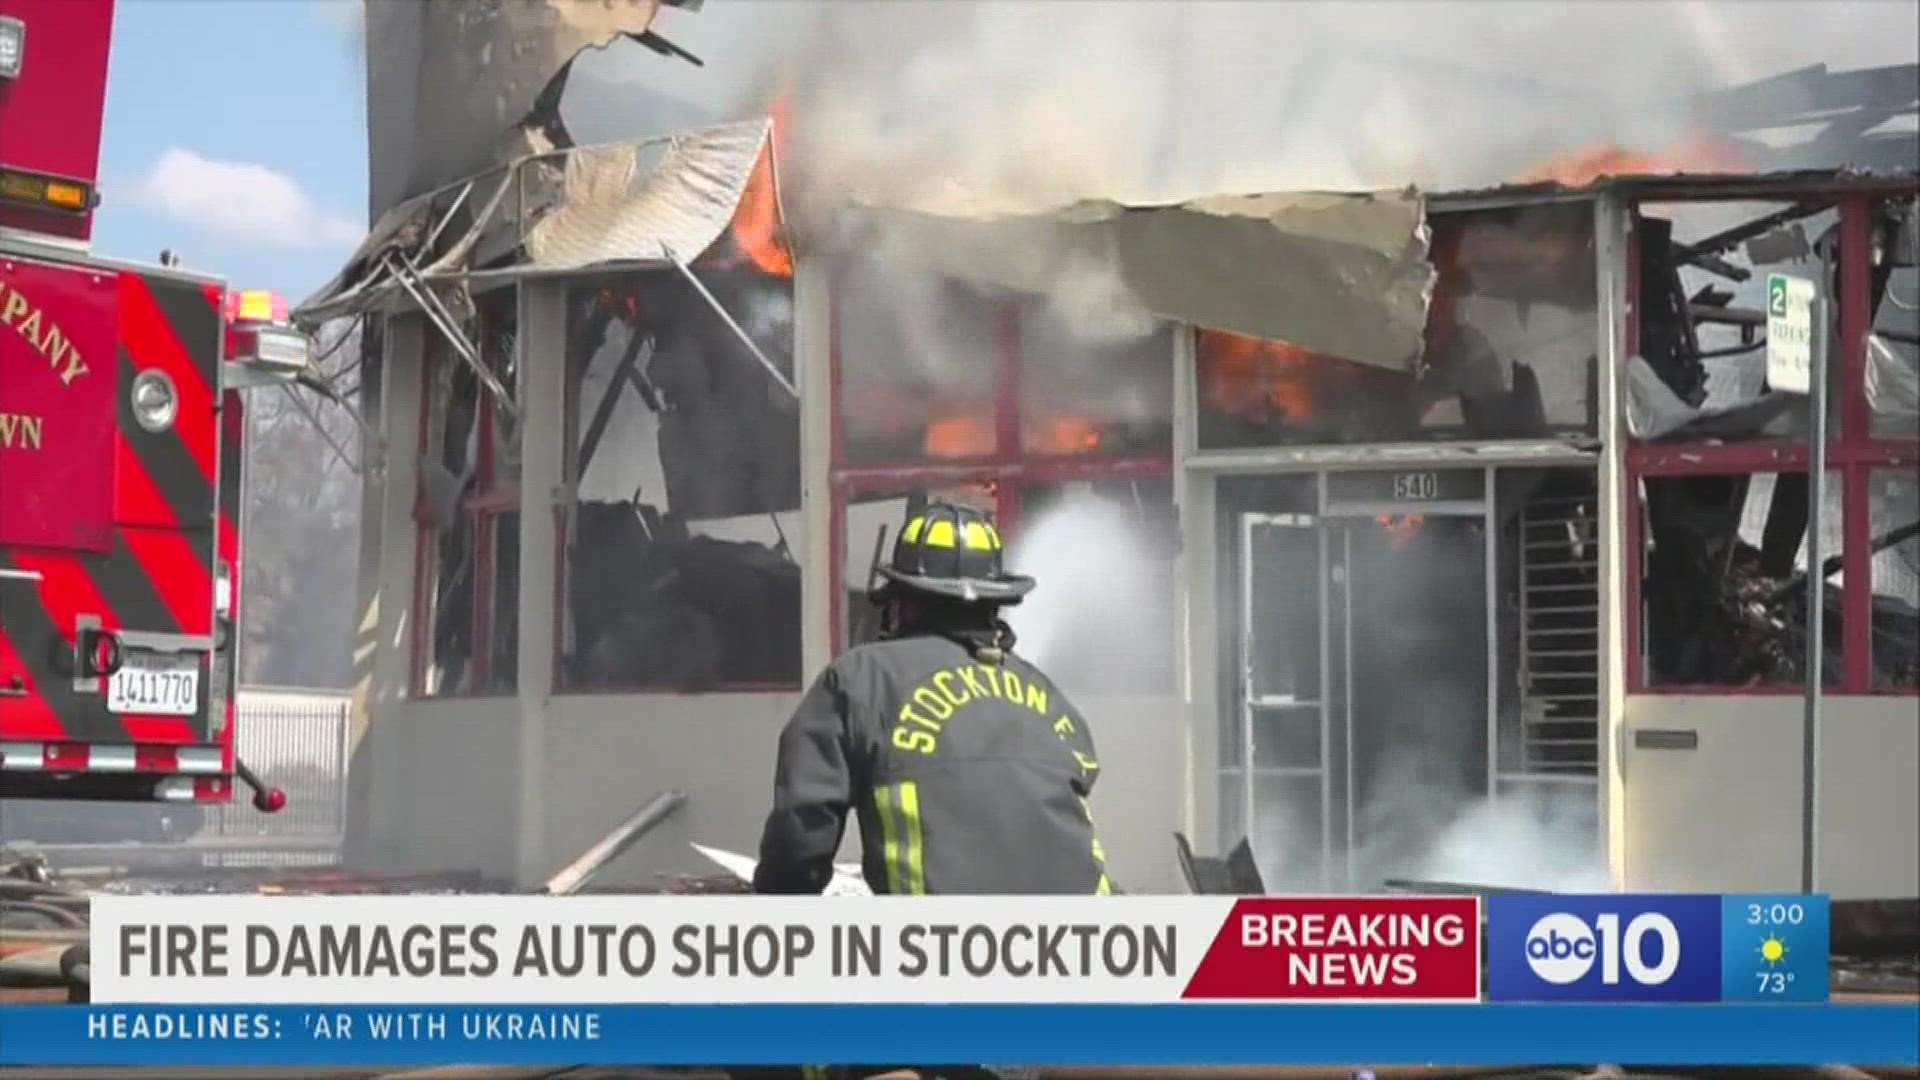 The fire erupted at a shuttered auto shop near Hunter and Oak Streets in downtown Stockton just before noon Thursday, sending up a column of black smoke.